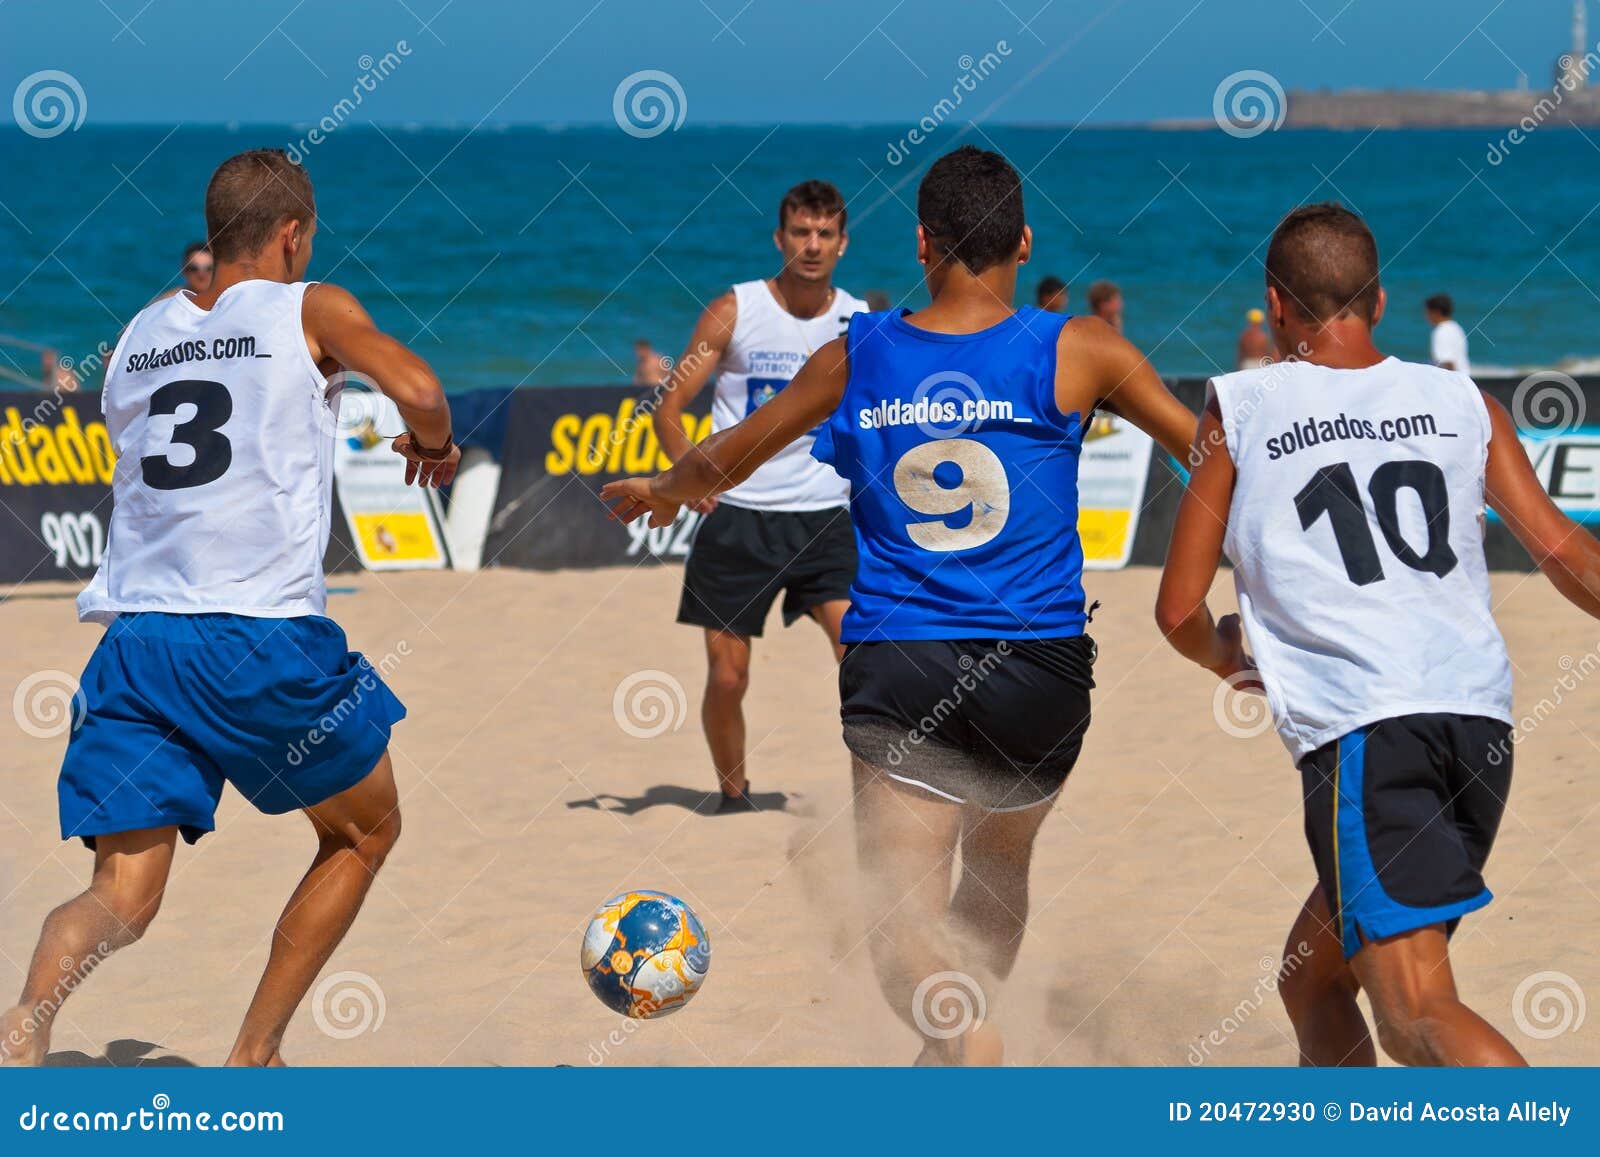 Spanish Championship Of Beach Soccer , 2006 Editorial Image - Image of ...